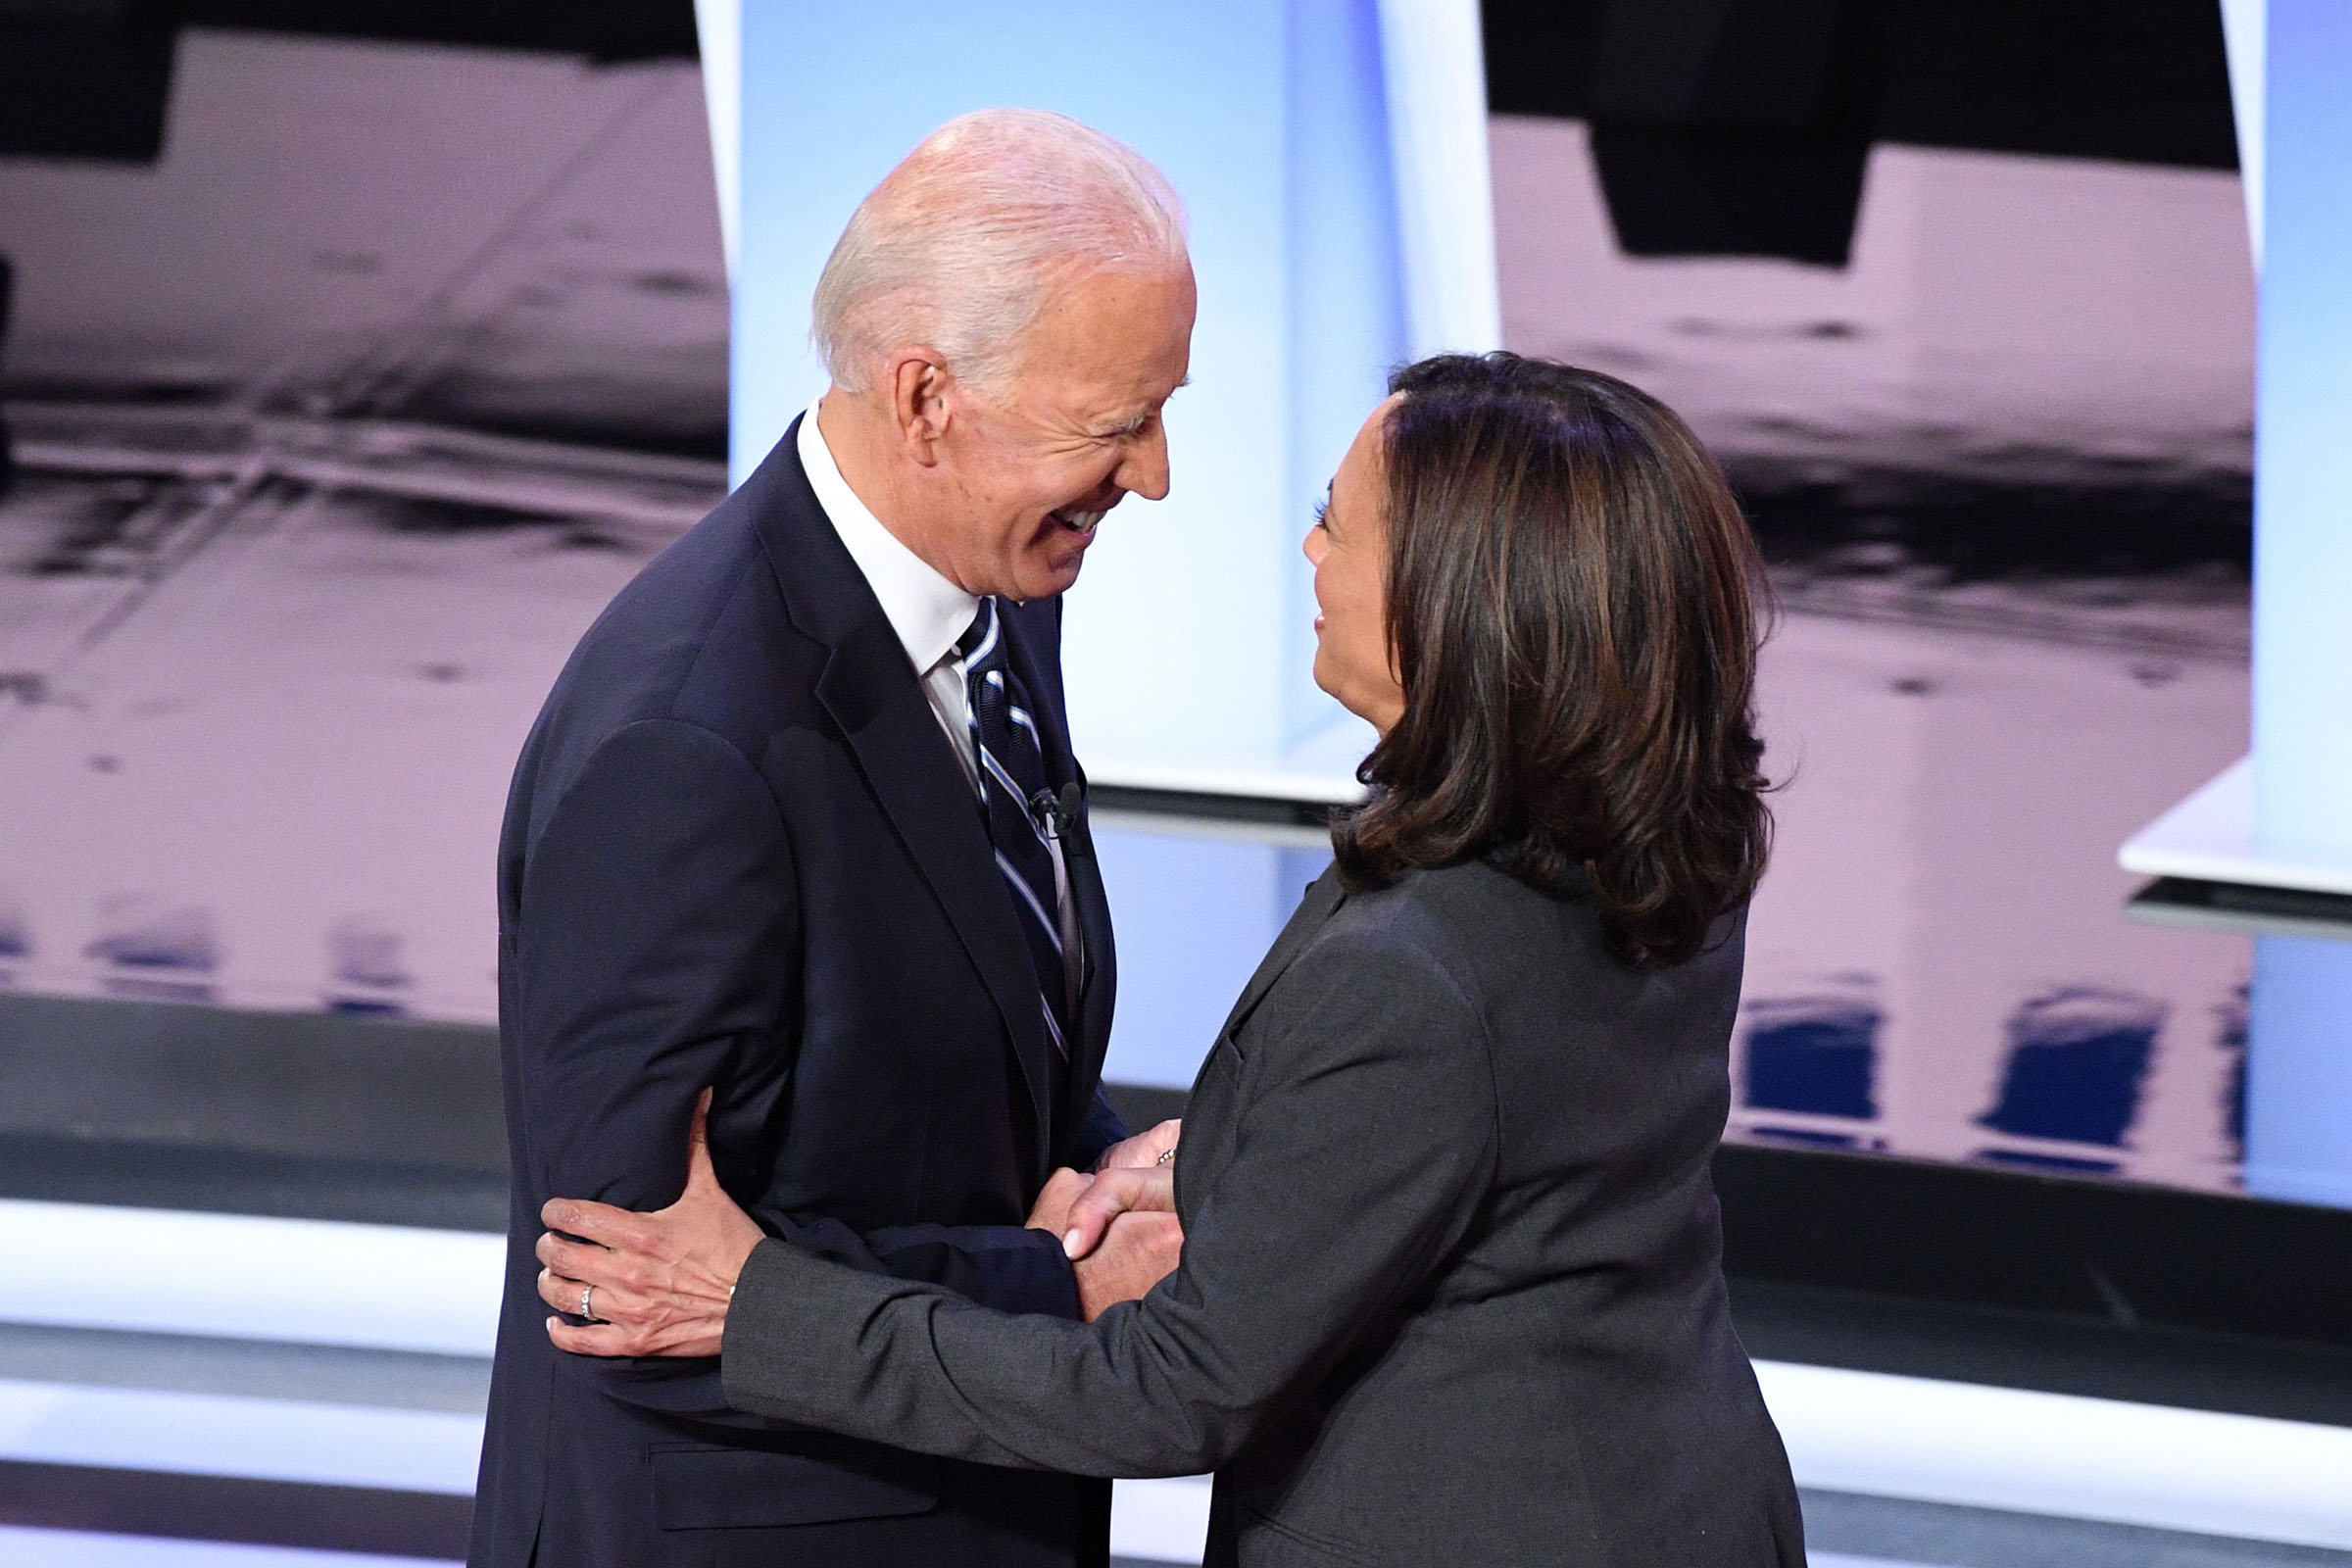 Democratic presidential hopefuls former Vice President Joe Biden (L) and US Senator from California Kamala Harris greet each other ahead of the second round of the second Democratic primary debate of the 2020 presidential campaign season hosted by CNN at the Fox Theatre in Detroit, Michigan on July 31, 2019. (Jim Watson—AFP/Getty Images)